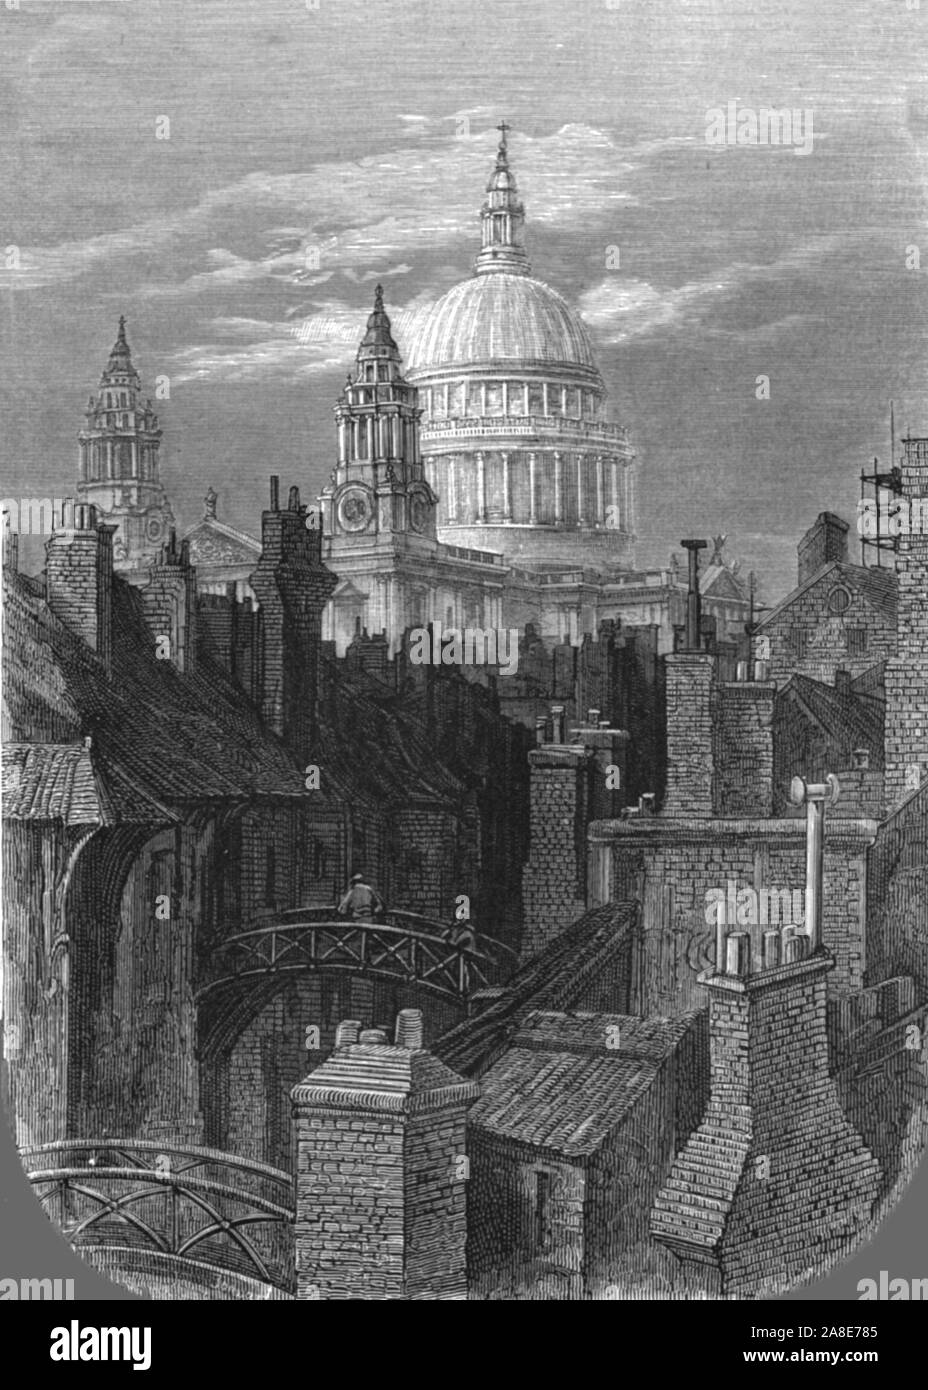 'St. Paul's from the Brewery Bridge', 1872. The done of St Paul's seen from  Barclay, Perkins and Company brewery in Park Street, Southwark. From, &quot;LONDON. A Pilgrimage&quot; by Gustave Dore and Blanchard Jerrold. [Grant and Co., 72-78, Turnmill Street, E.C., 1872]. Stock Photo